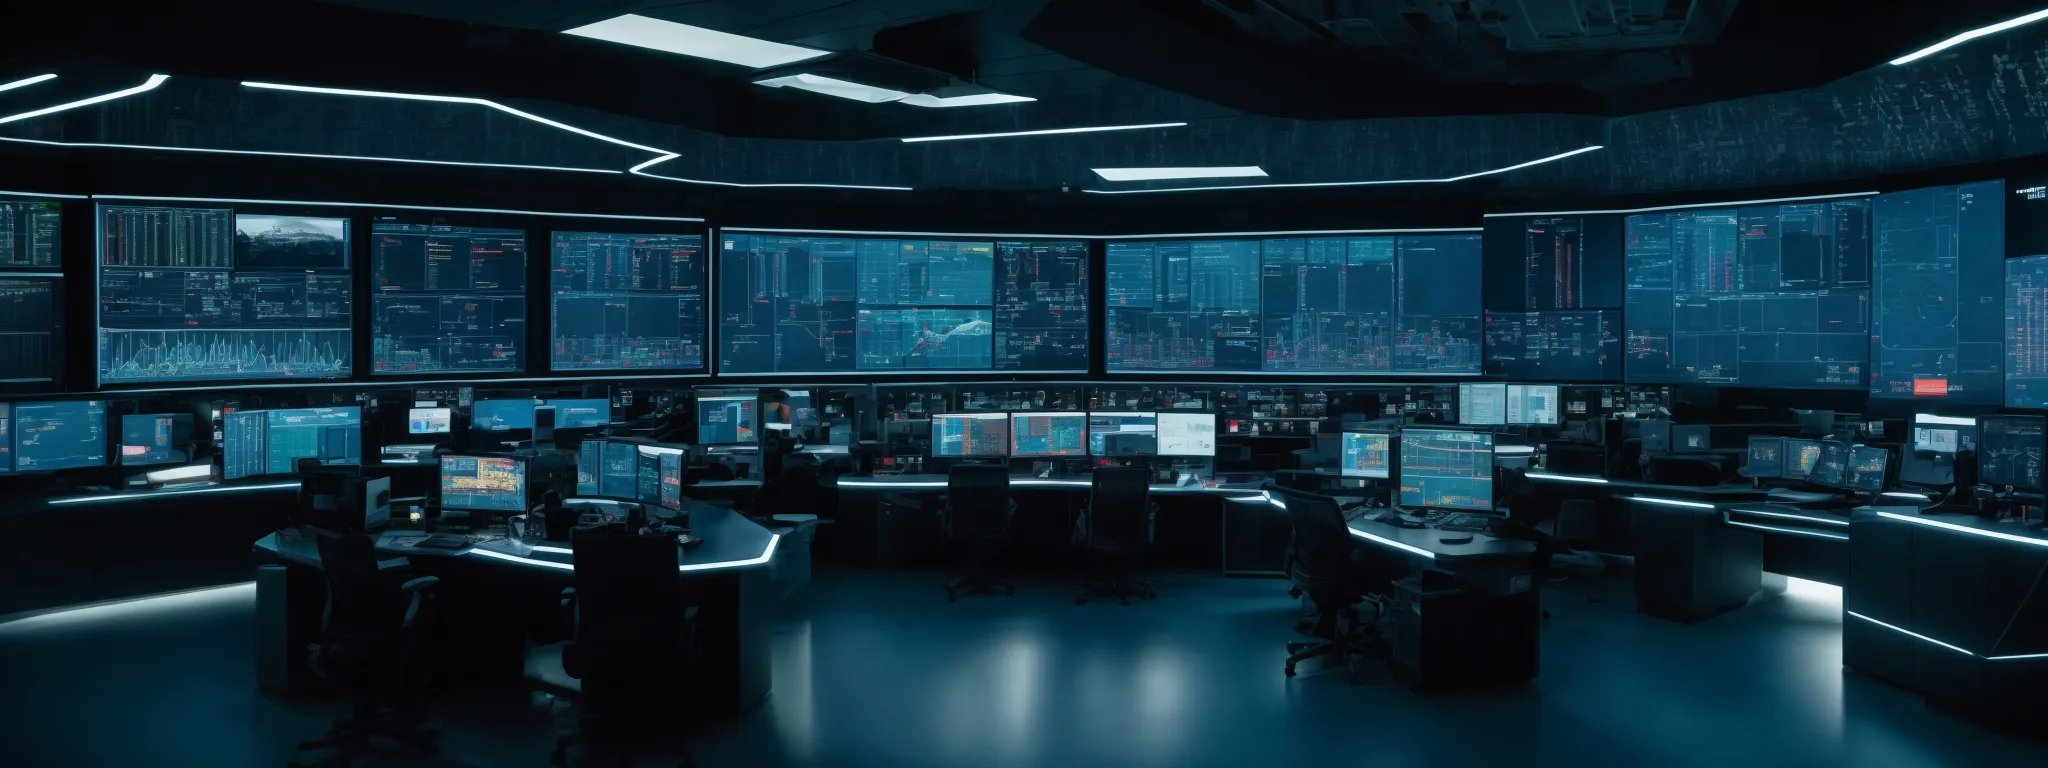 a futuristic control room with screens displaying data analytics and a central ai interface coordinating search engine strategies.